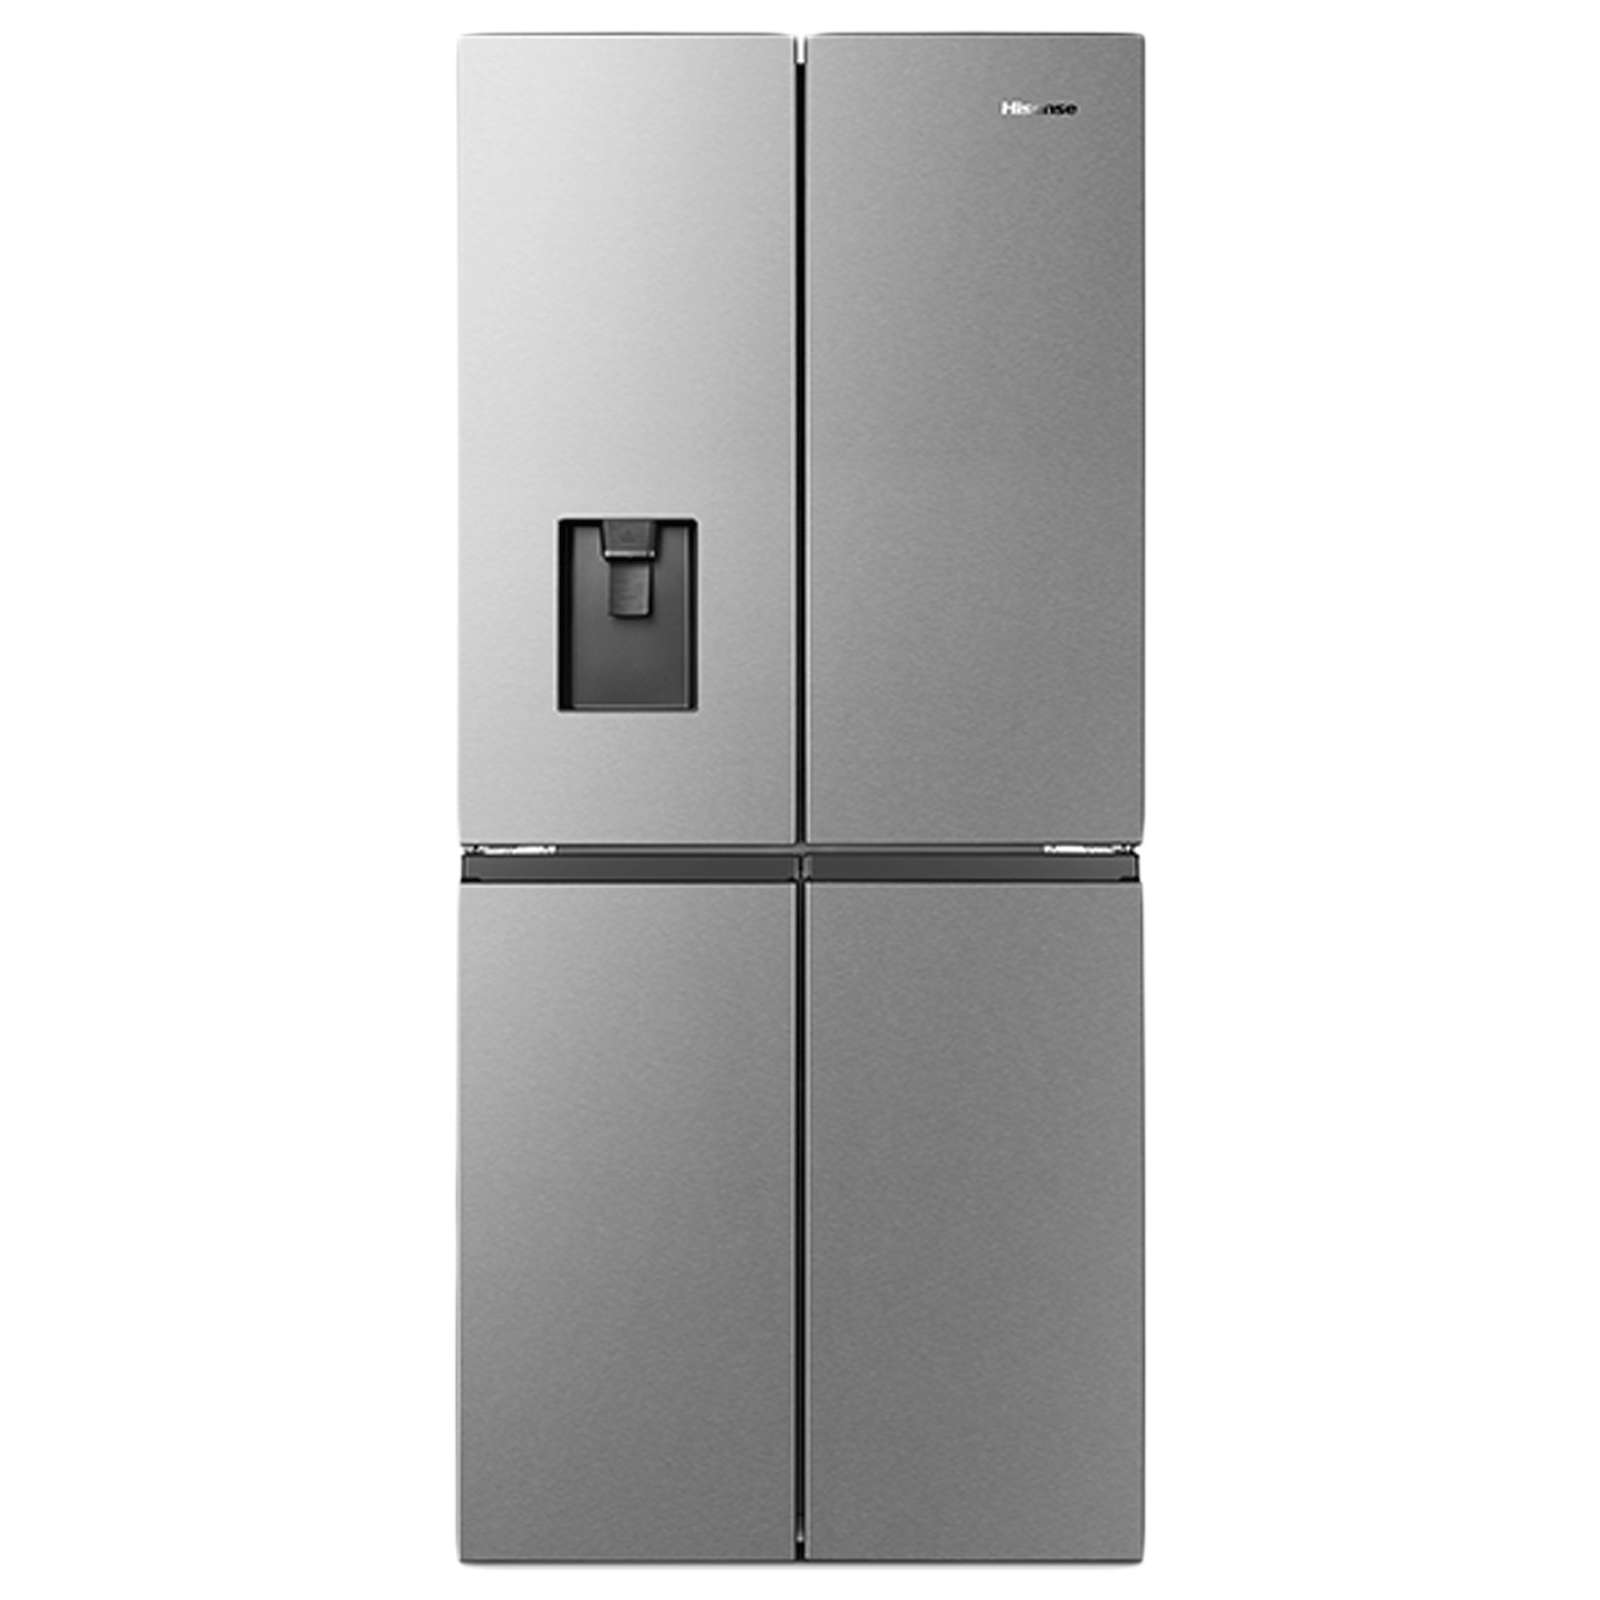 Hisense Pure Flat Series 507 Litres Dual Cooling System Inverter Side by Side Door Refrigerator (Holiday Mode, RQ507N4SSVW, Silver)